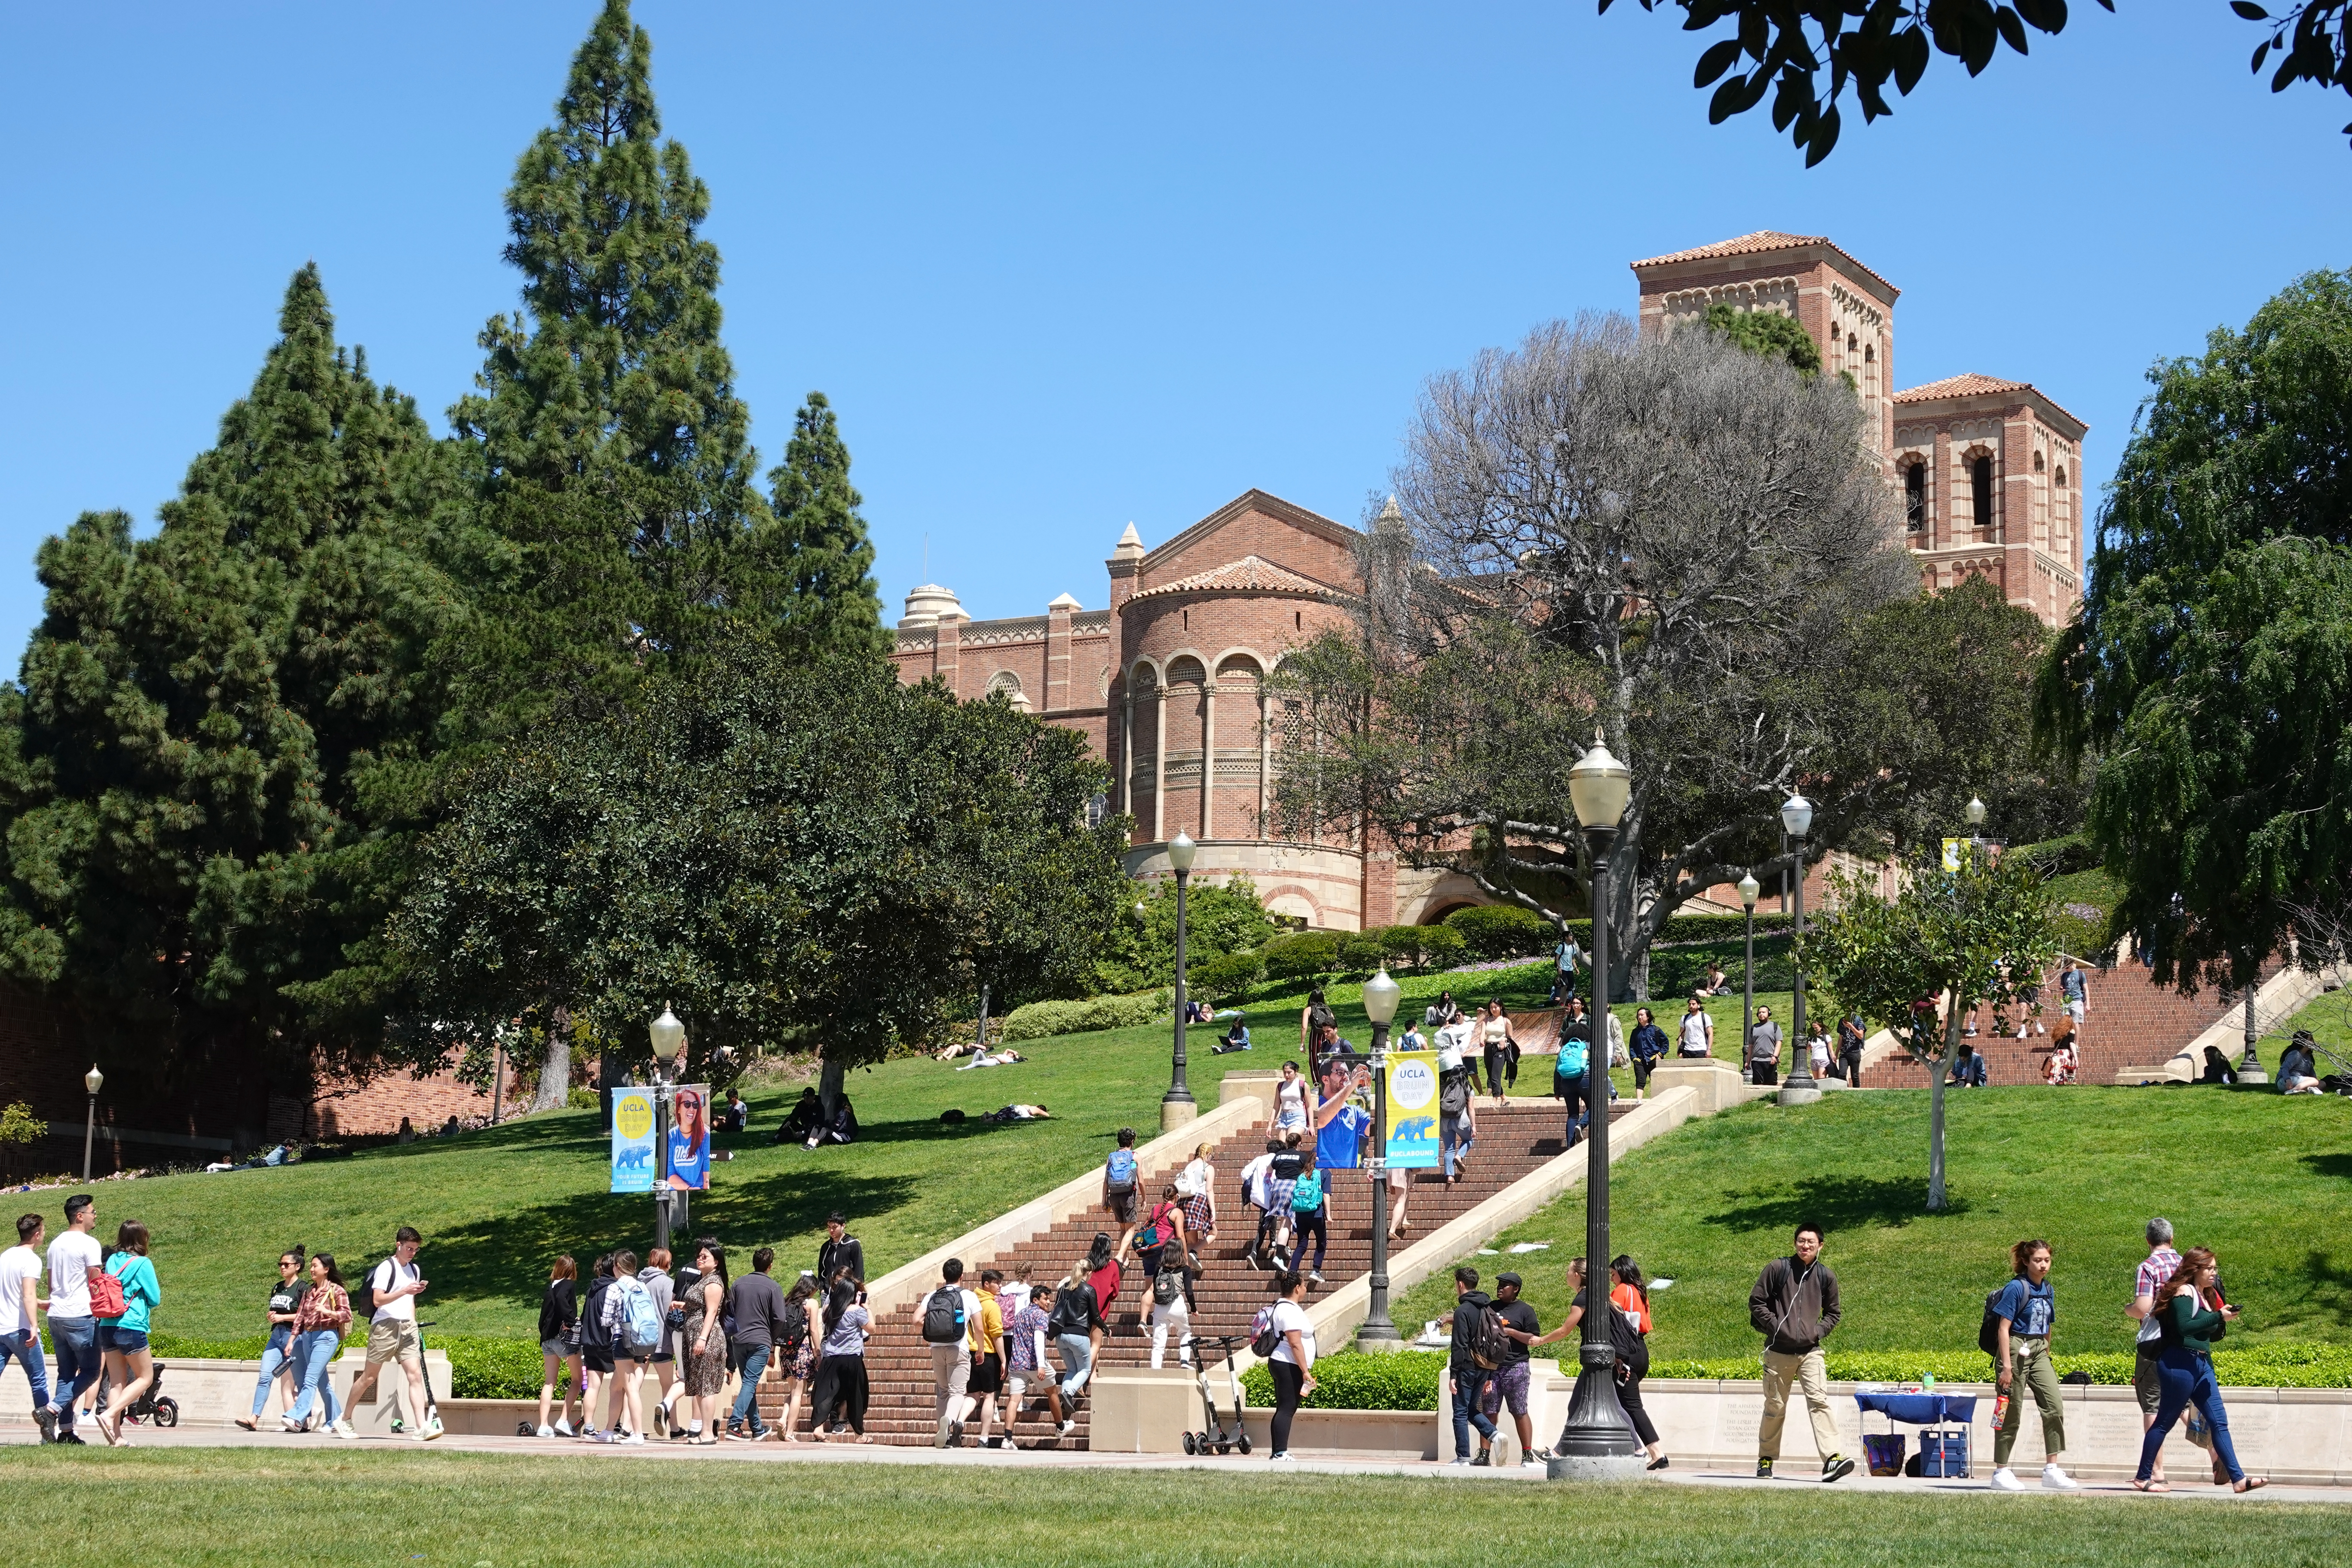 Janss Steps and surrounding buildings during the day with students walking around.